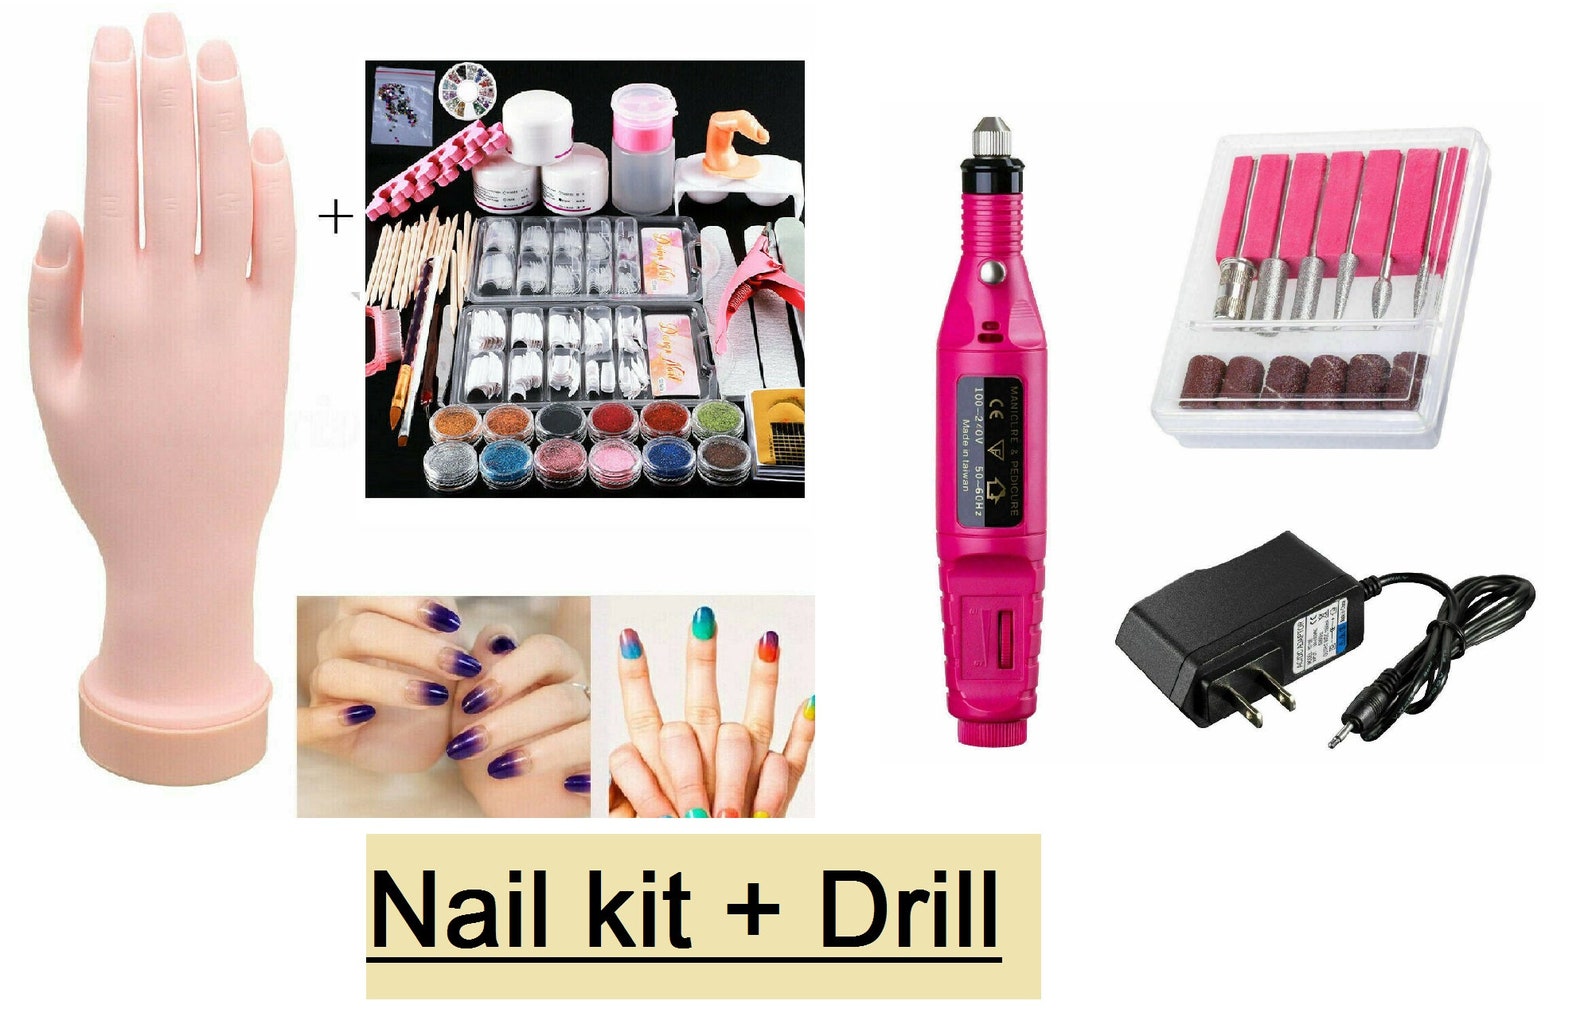 7. Nail Art Extension Kit with LED Lamp - wide 6